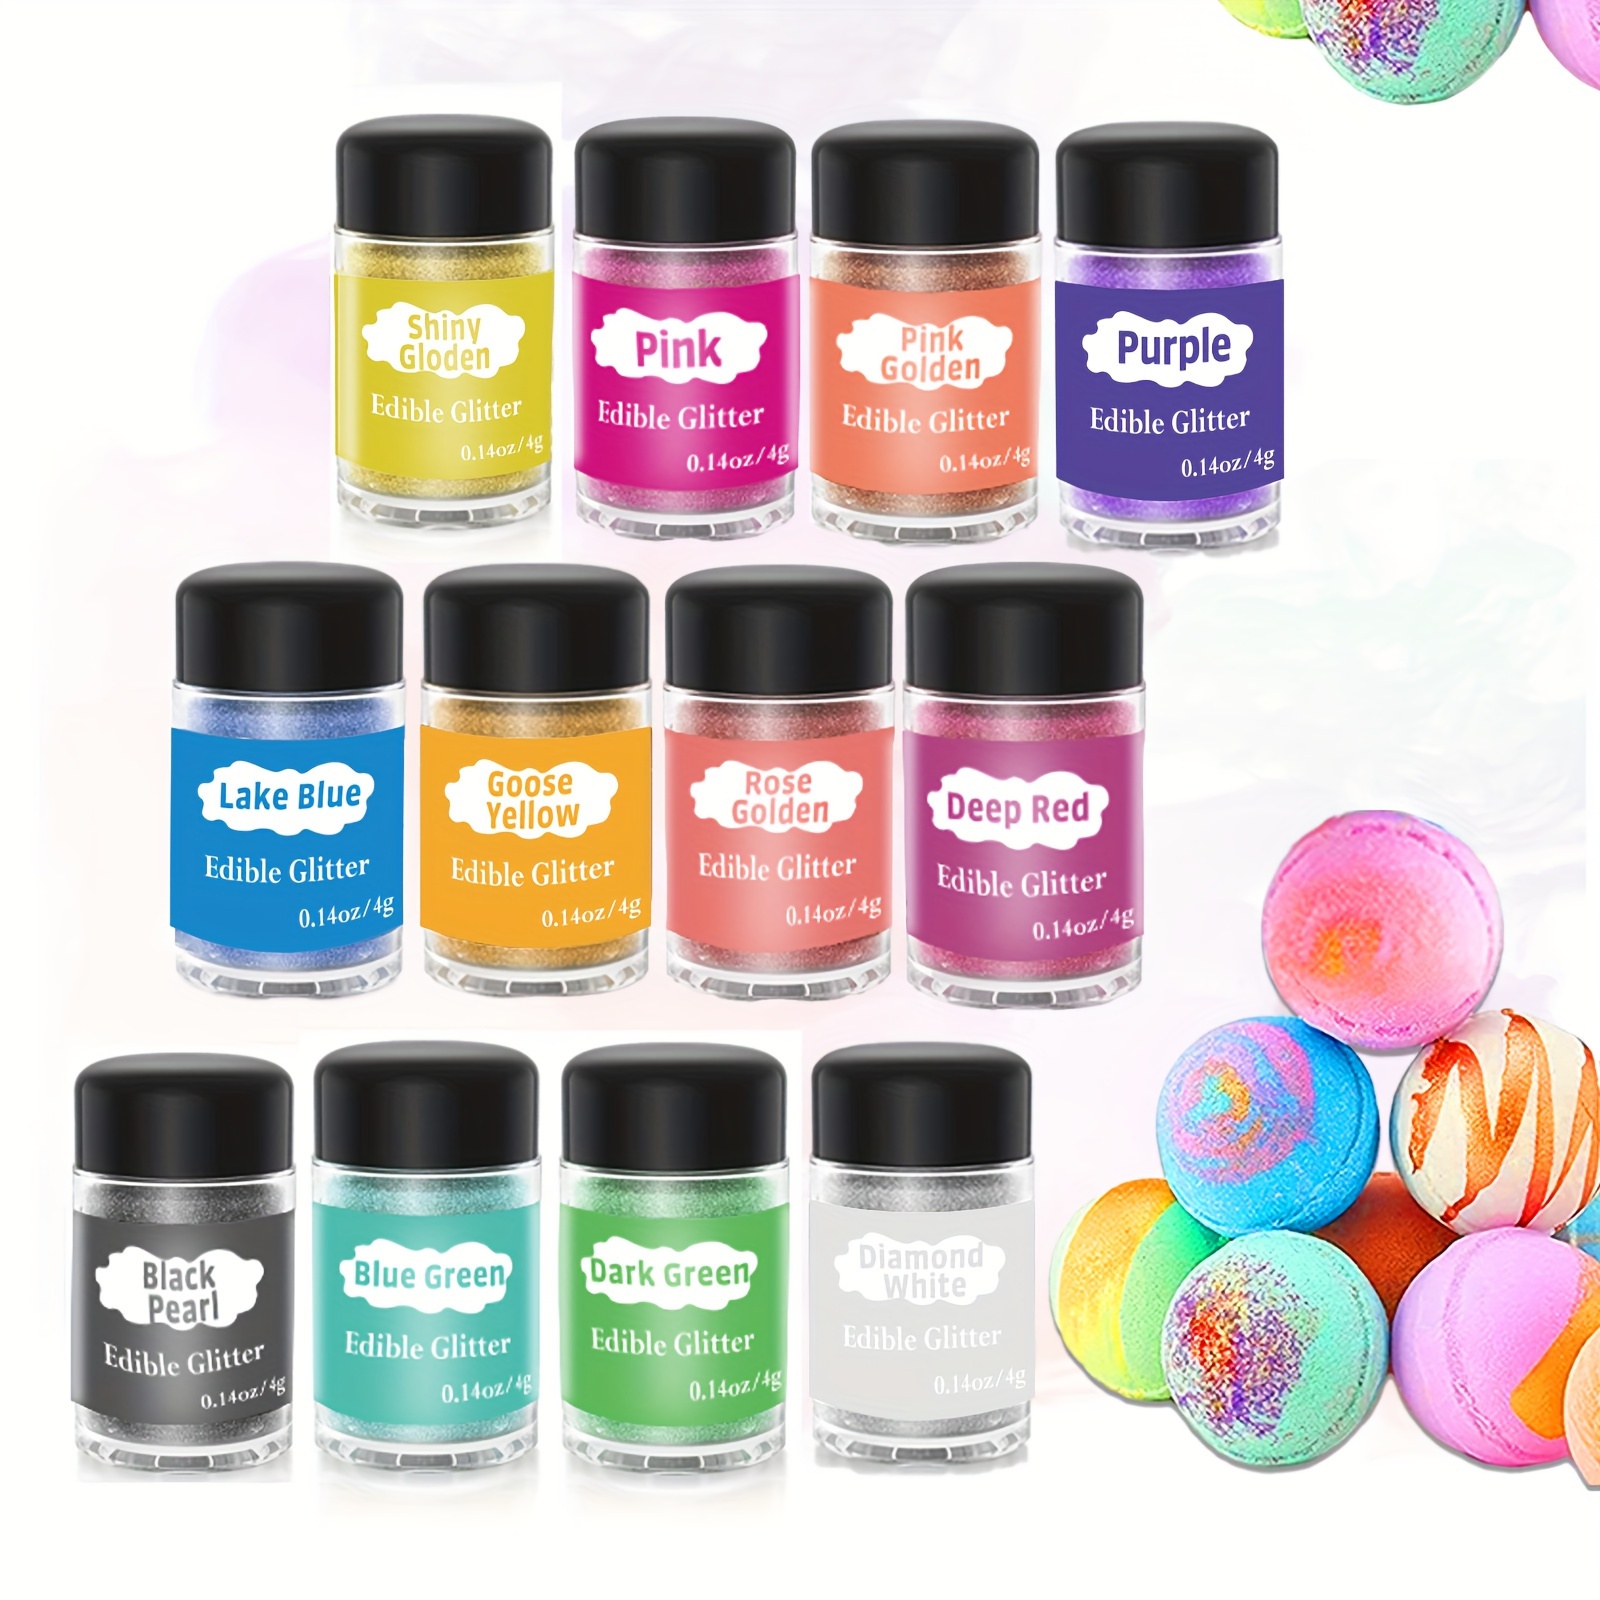 Starry Sky Resin Pigment, 10ml Sparkly Interference Resin Color, Highly  Concentrated Colourant, Epoxy UV Resin Dye, Arts & Crafts Colors 